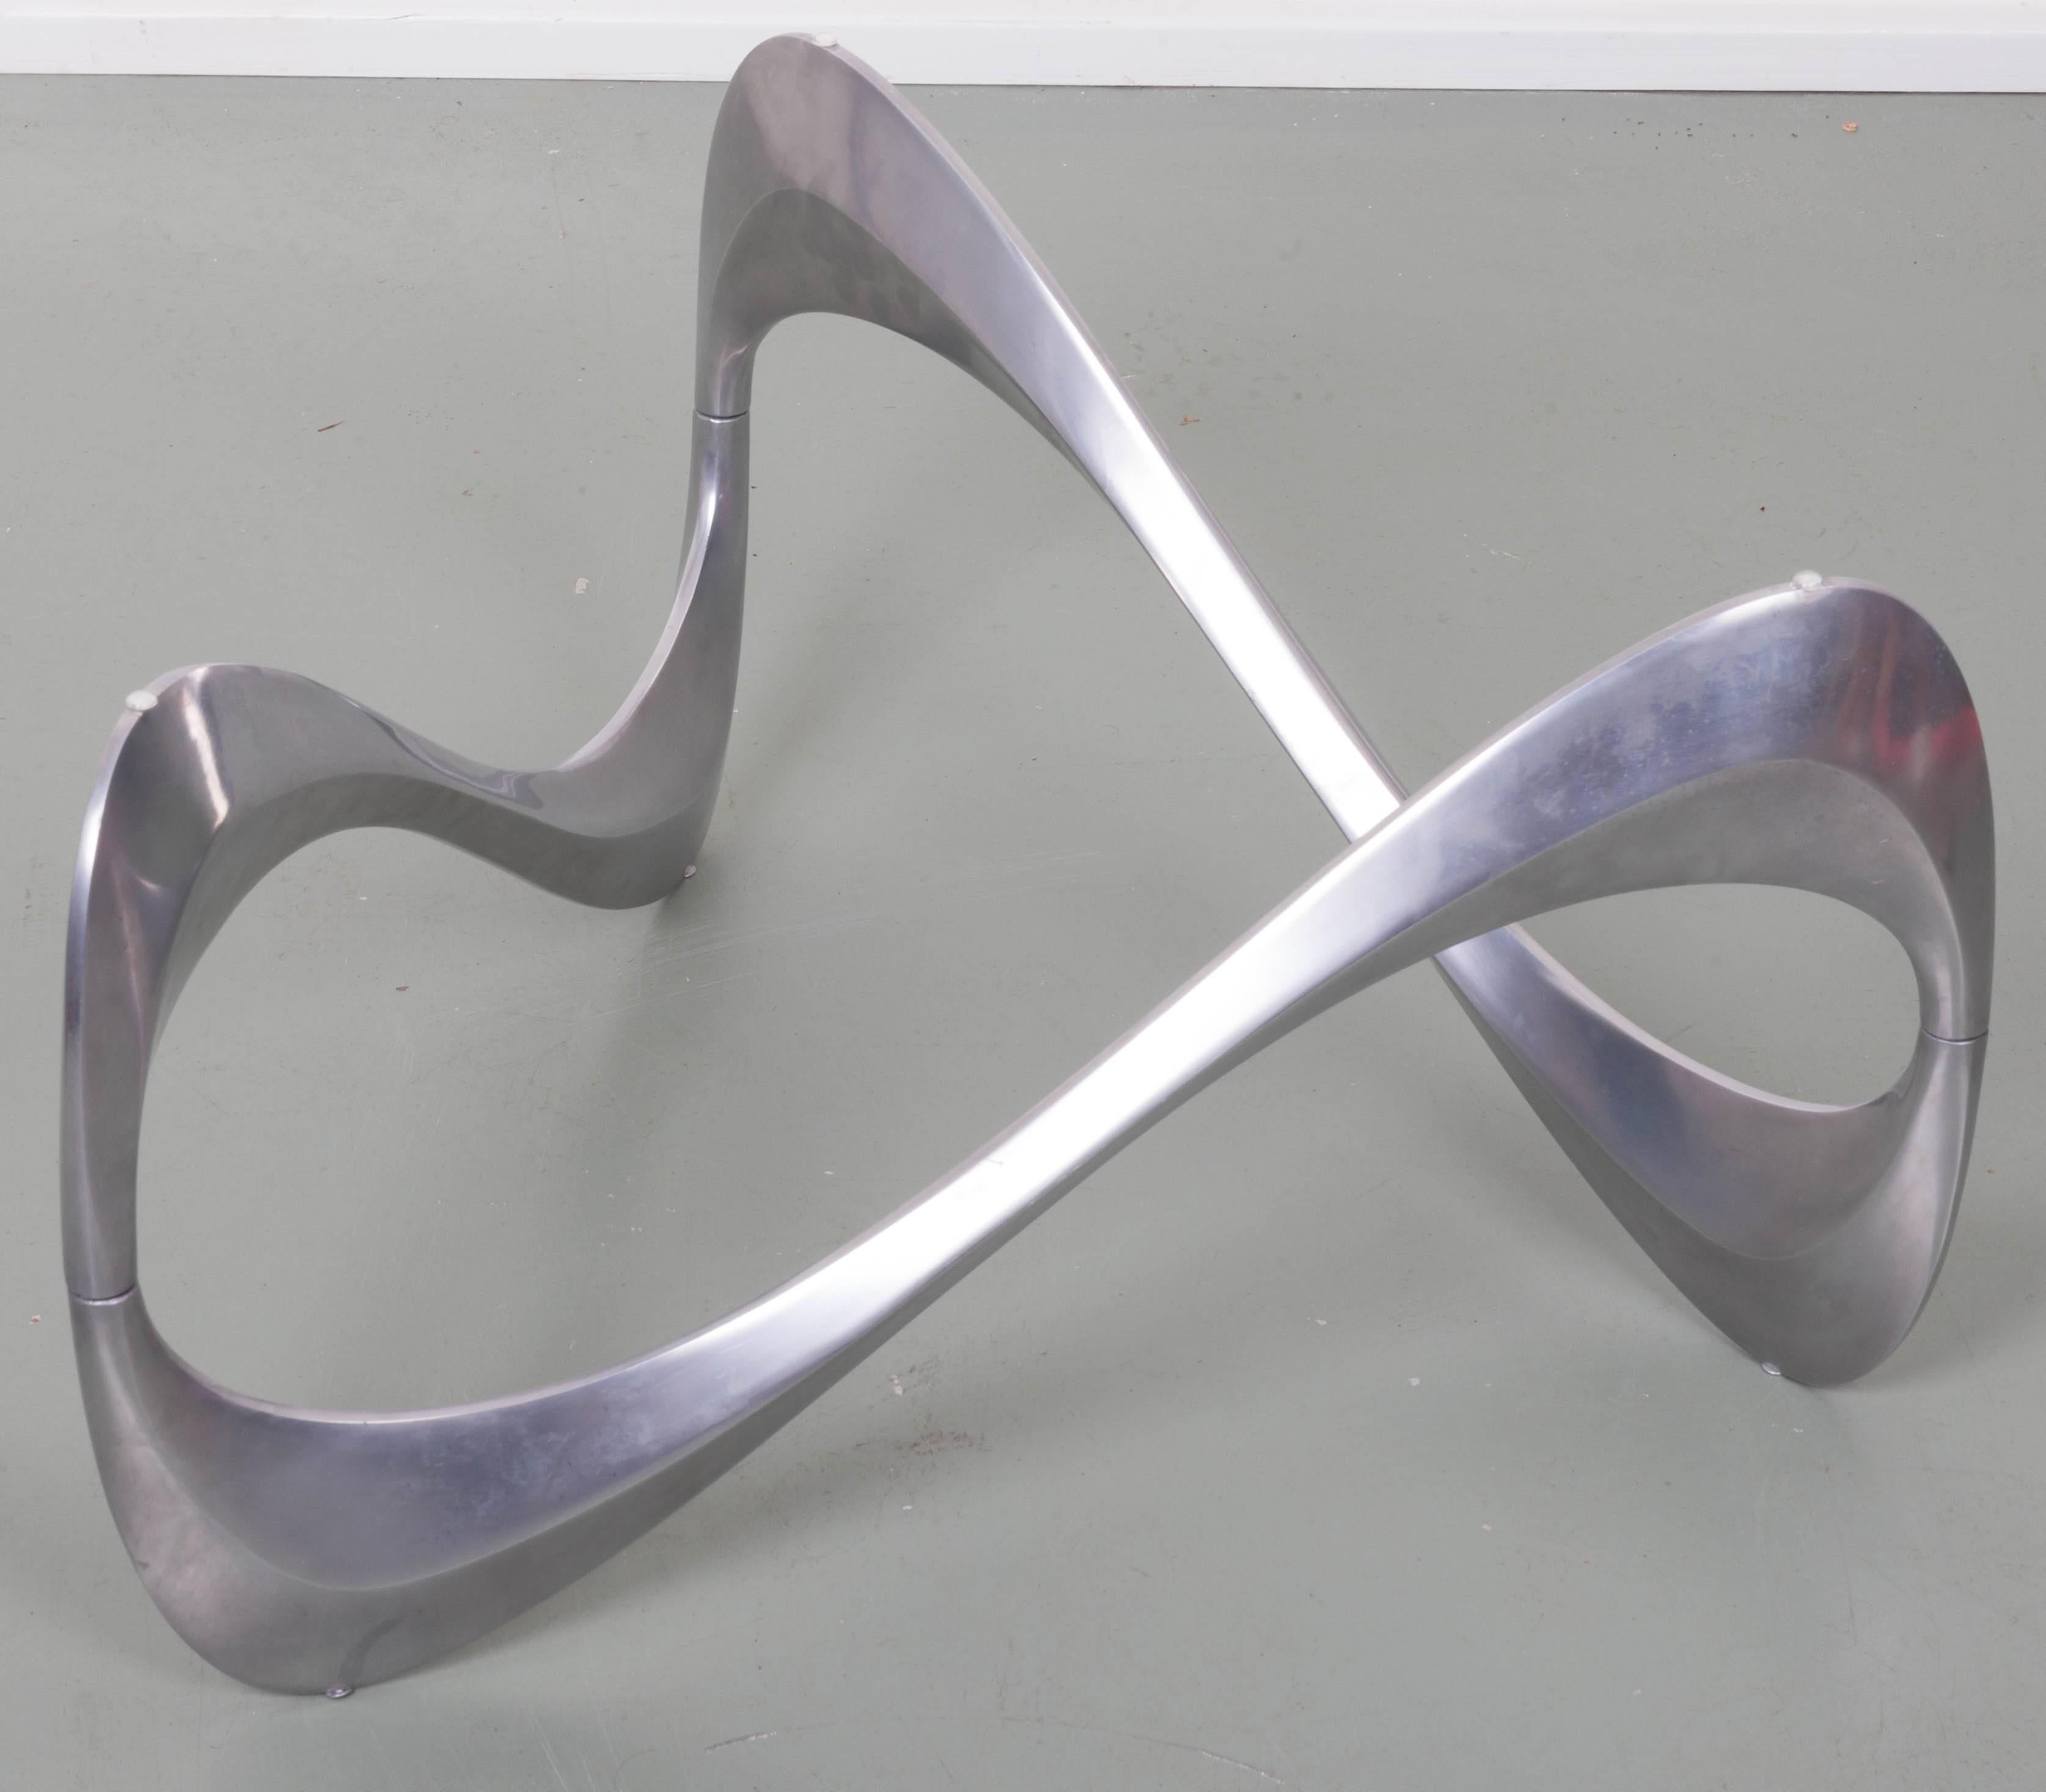 Aluminum and glass snake coffee table by Knut Hesterberg for Ronald Schmitt.
Base measures 27